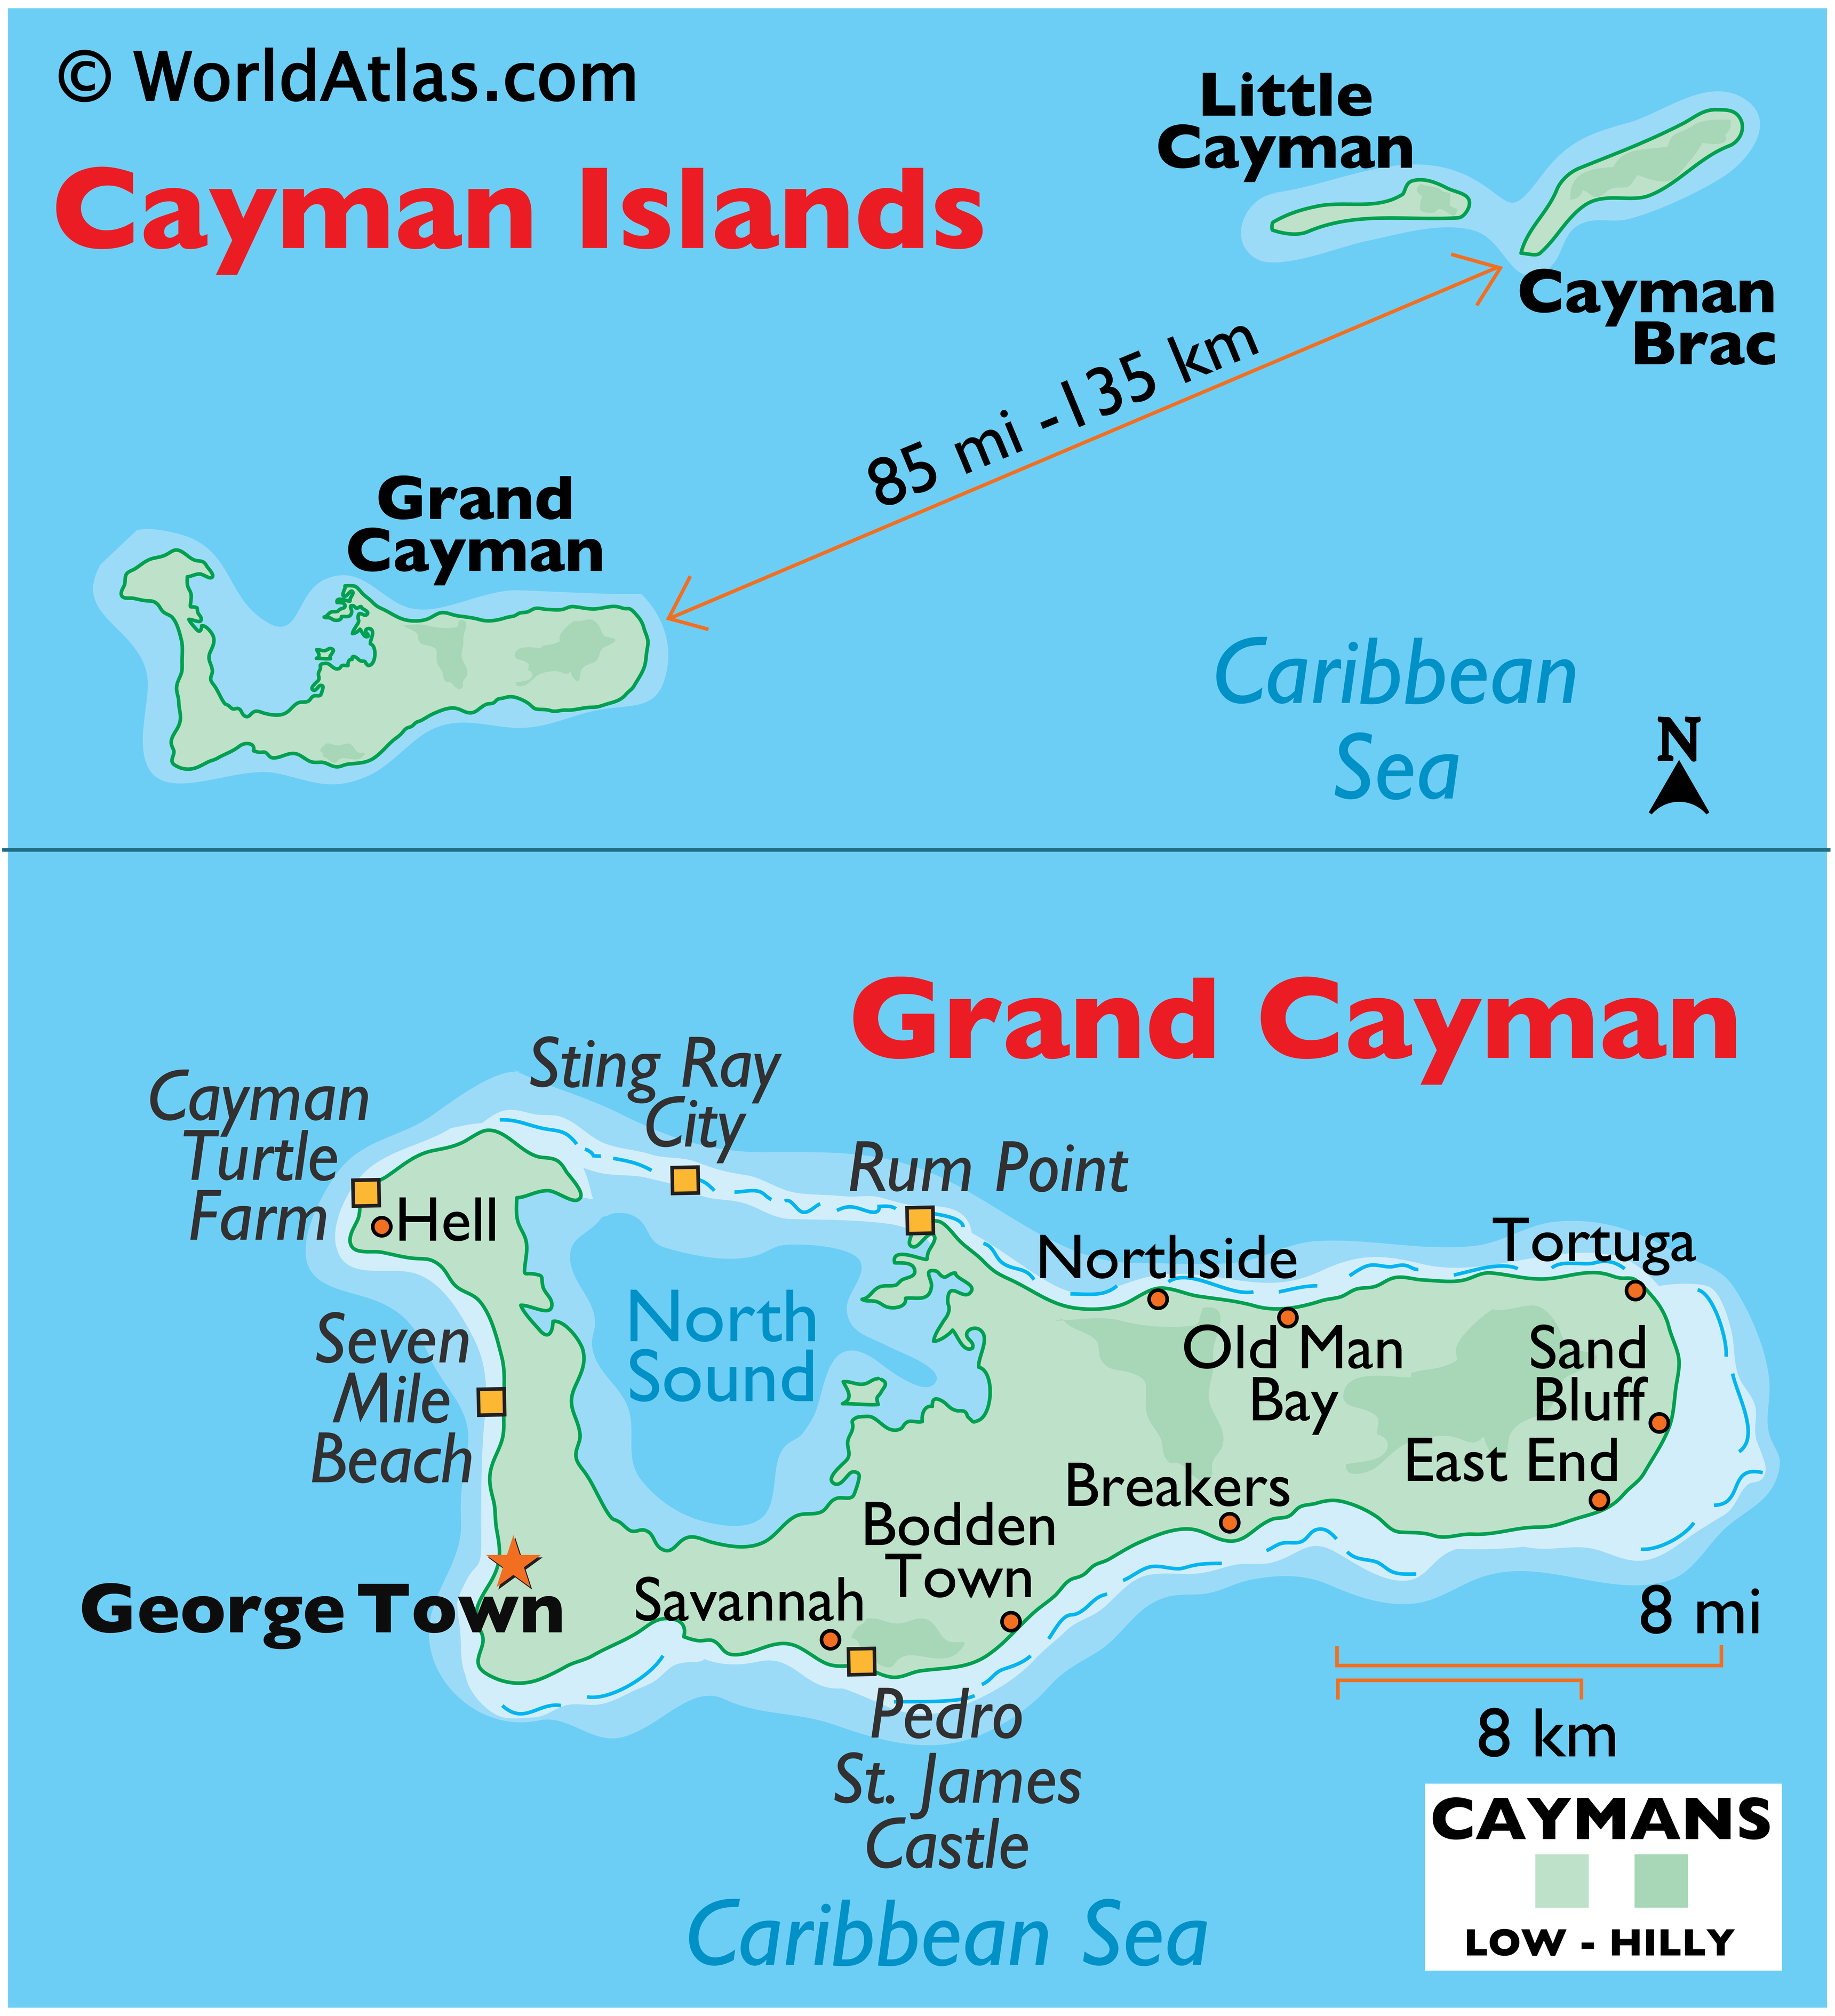 Top 99+ Images where are the cayman islands located on a map Full HD, 2k, 4k